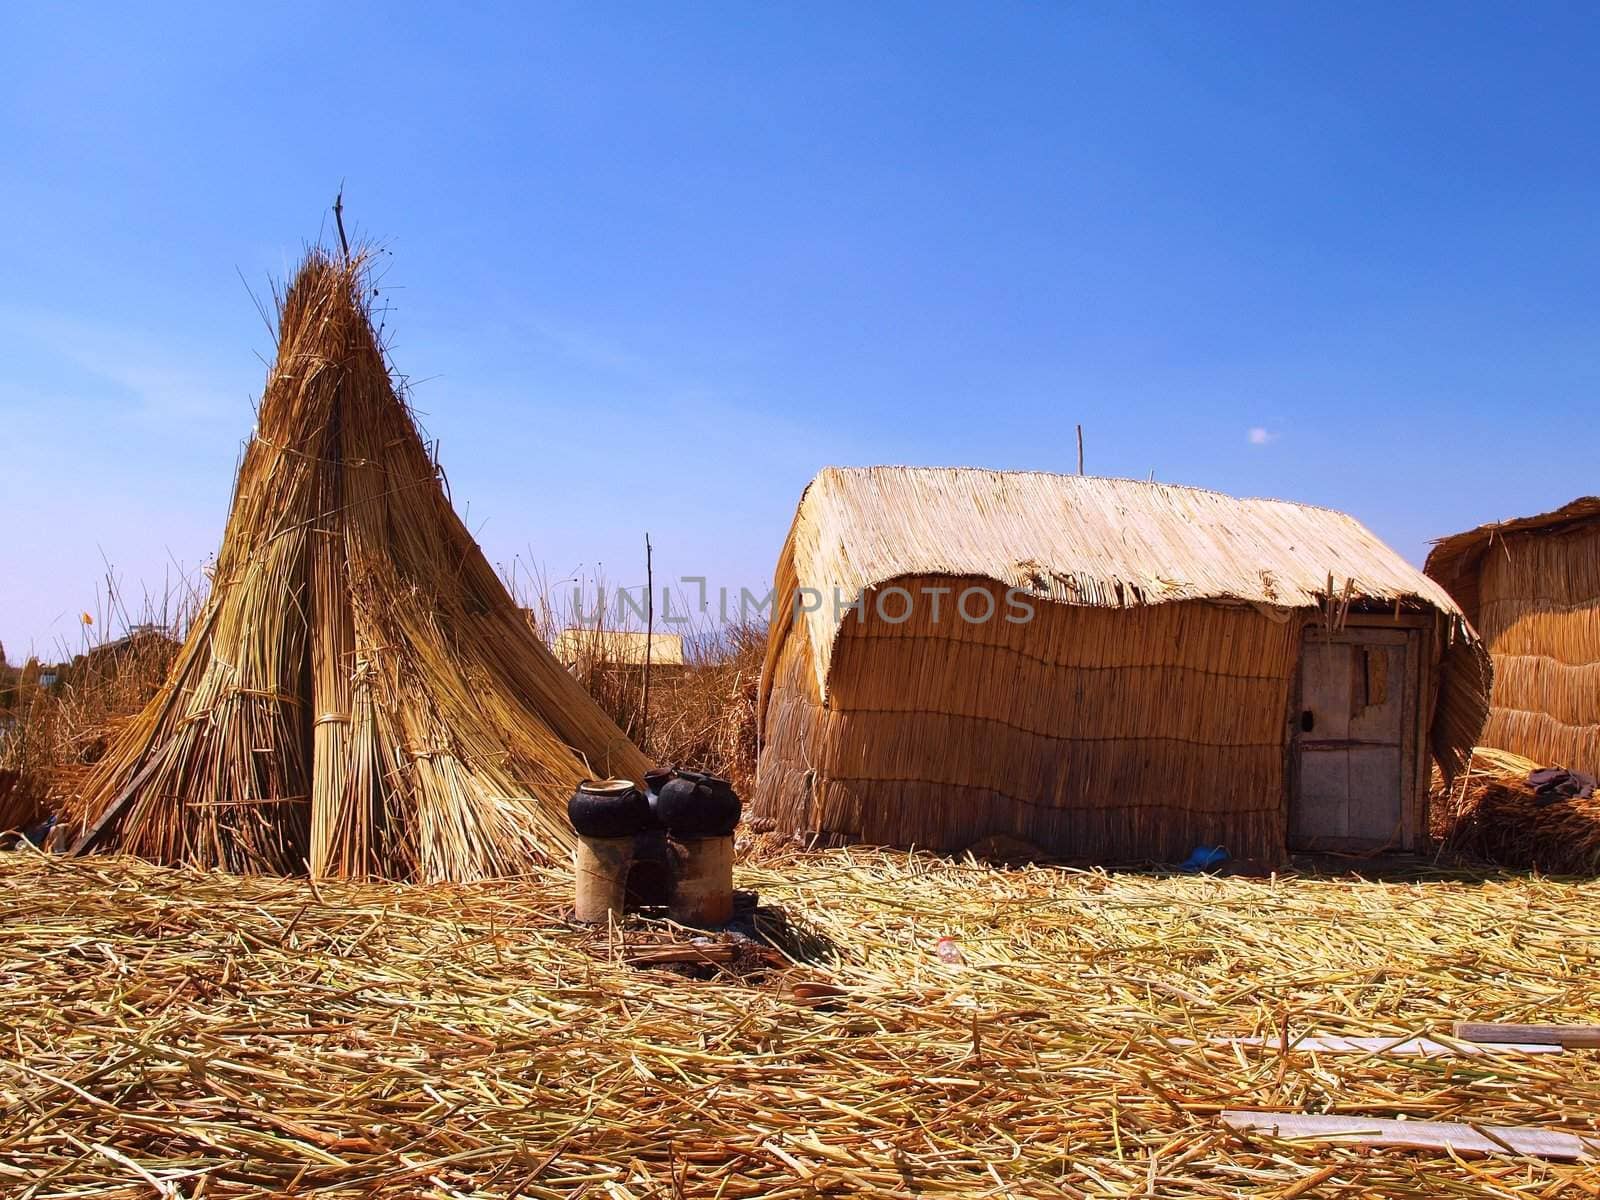 Uros Floating Islands on the Lake Titicaca in Peru